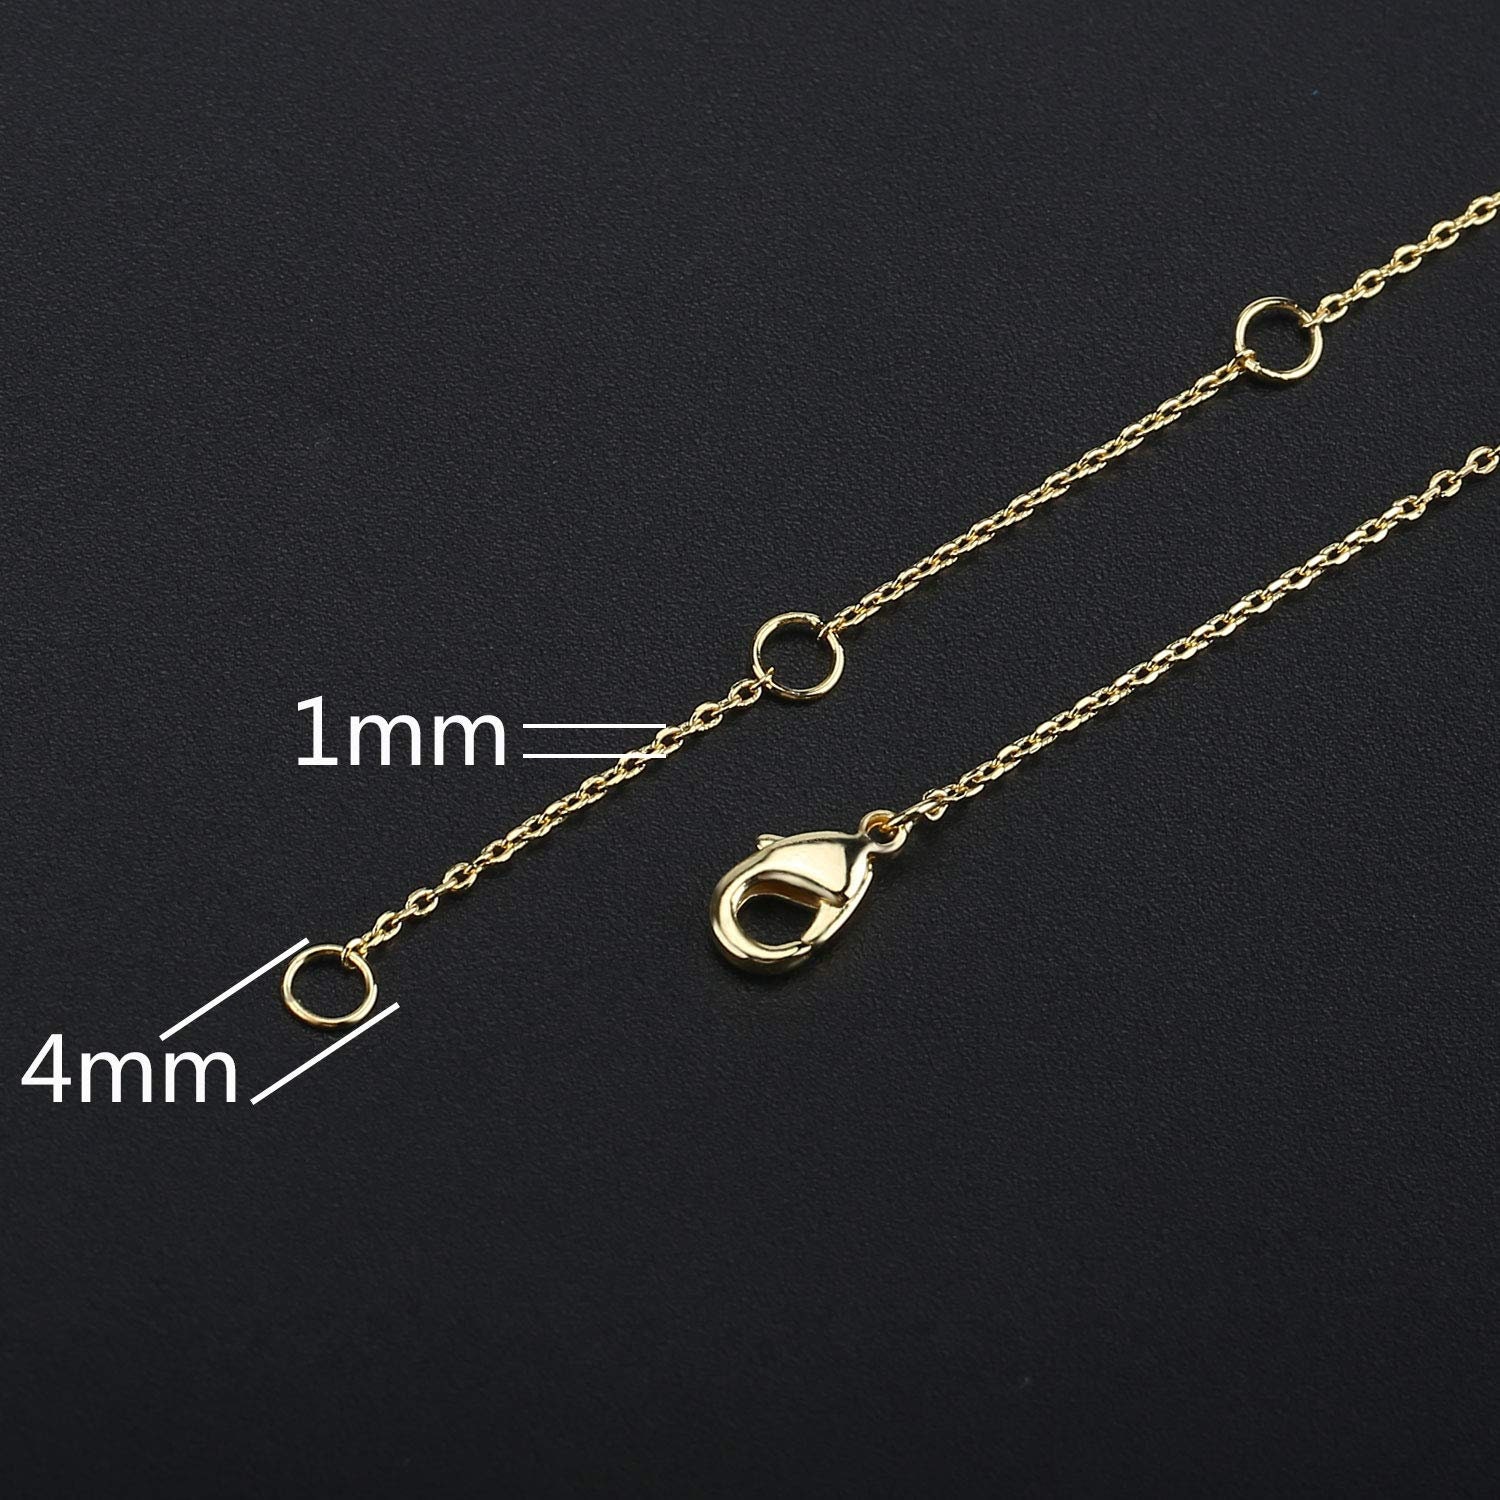  Wholesale 6PCS 14K Gold Plated Brass Box Chain Necklace Bulk  for Jewelry Making (18 inch) : Arts, Crafts & Sewing